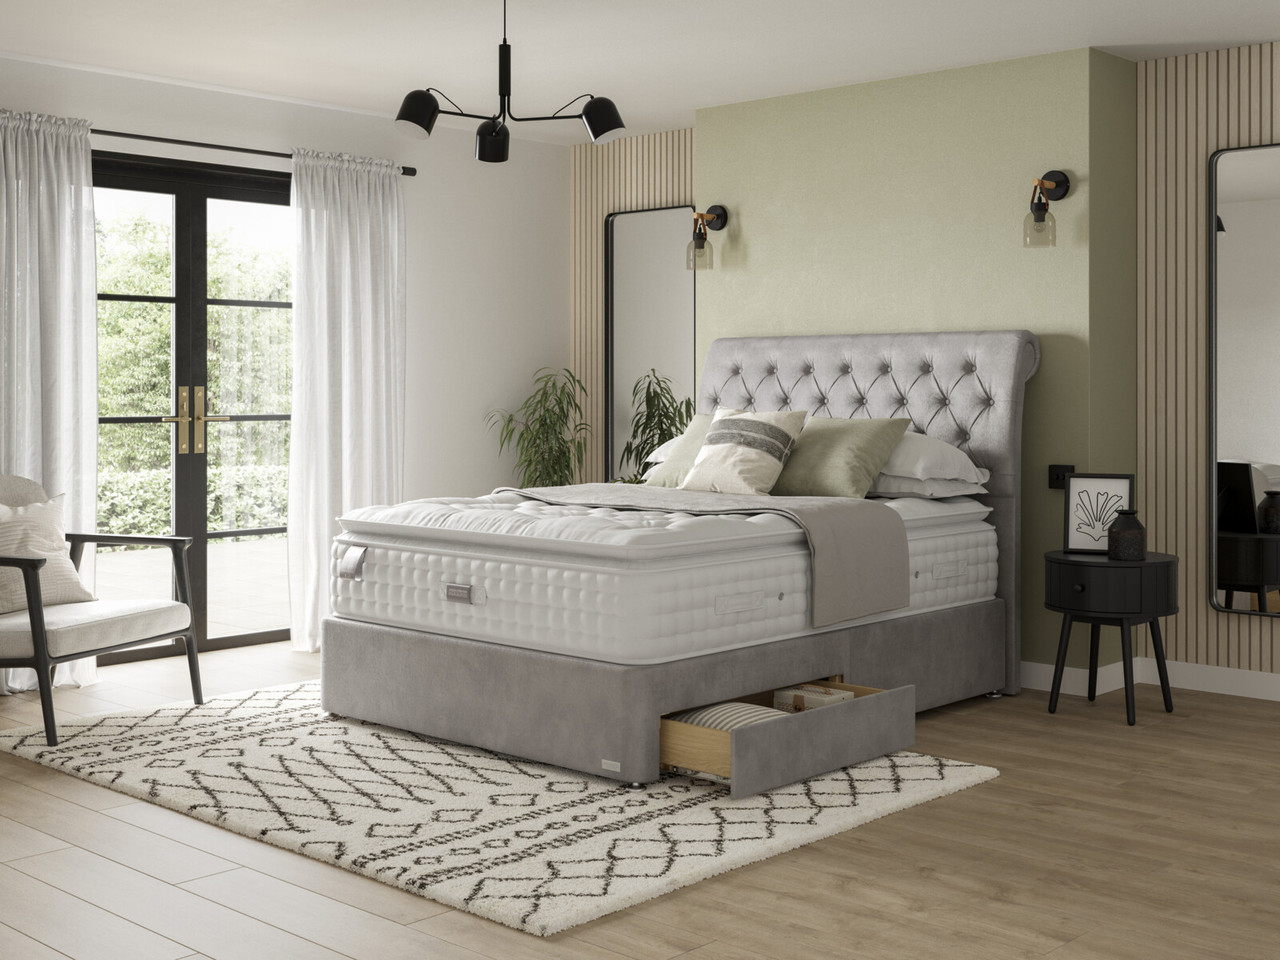 Staples And Co Artisan Deluxe Divan Bed Set On Glides Double Castello Ink